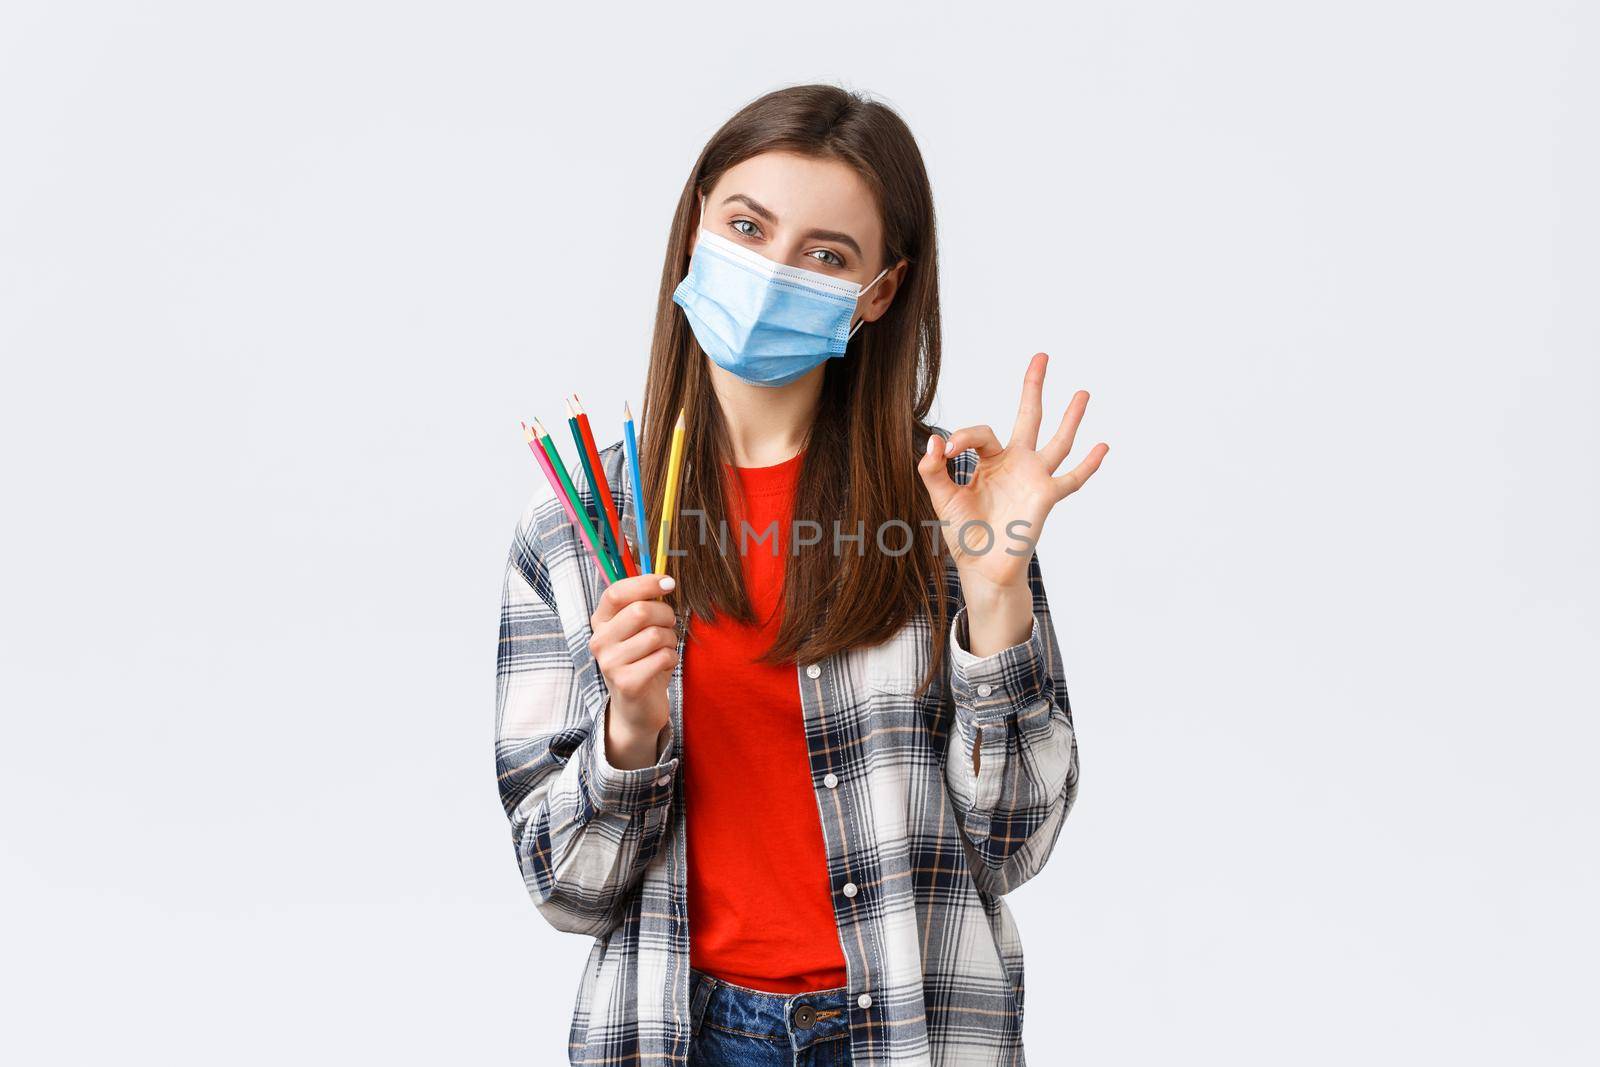 Social distancing, hobbies on covid-19 outbreak, coronavirus concept. Cute cheerful girl in medical mask make online lesson on how to draw during self-quarantine, show colored pencils and OK sign.